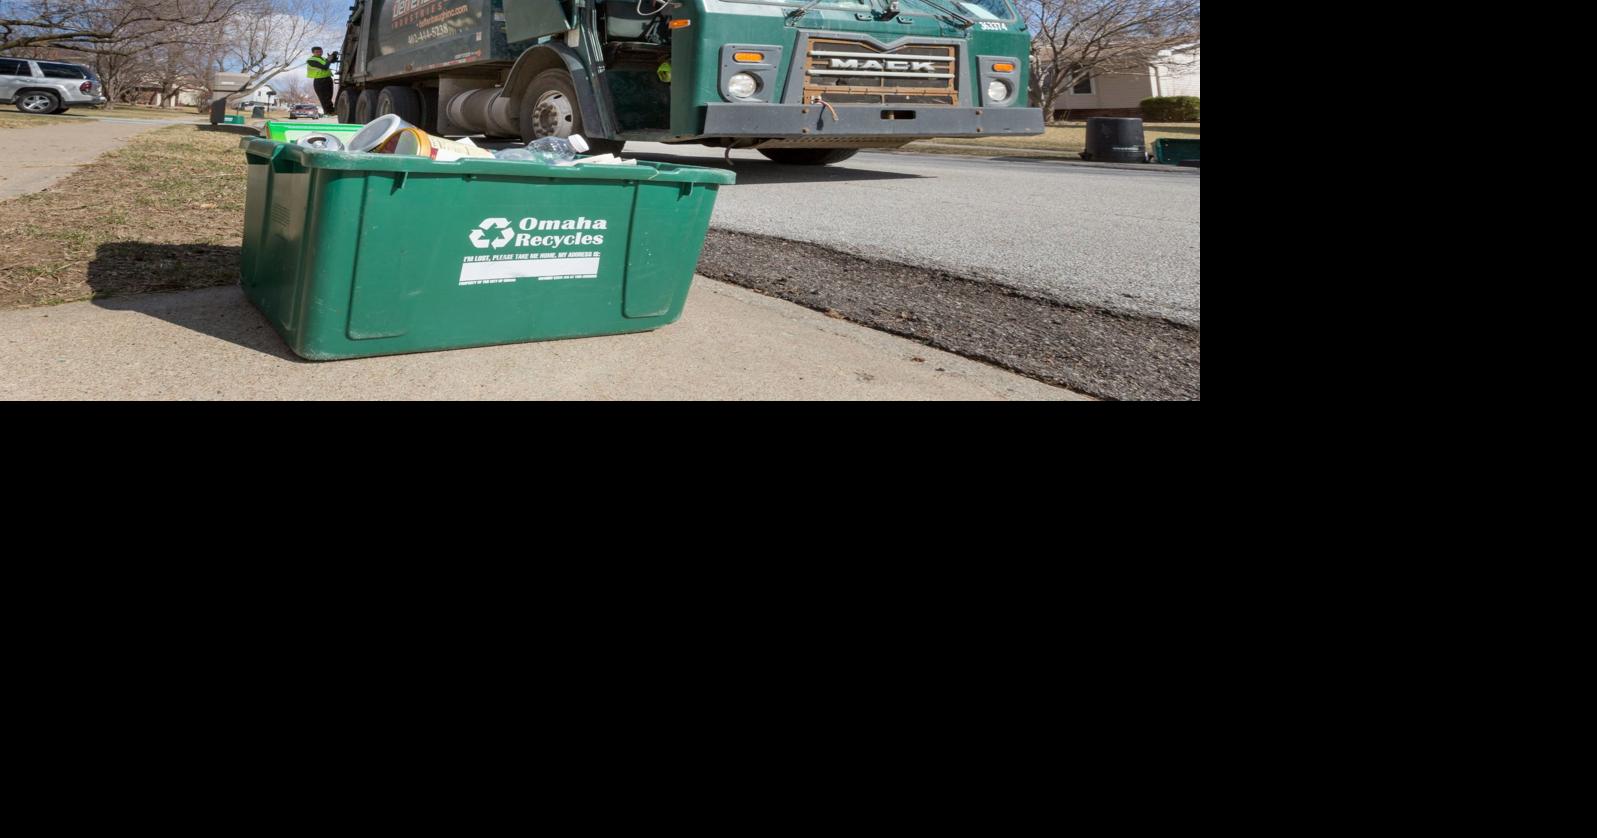 Editorial Omaha yard waste collection is stumbling badly